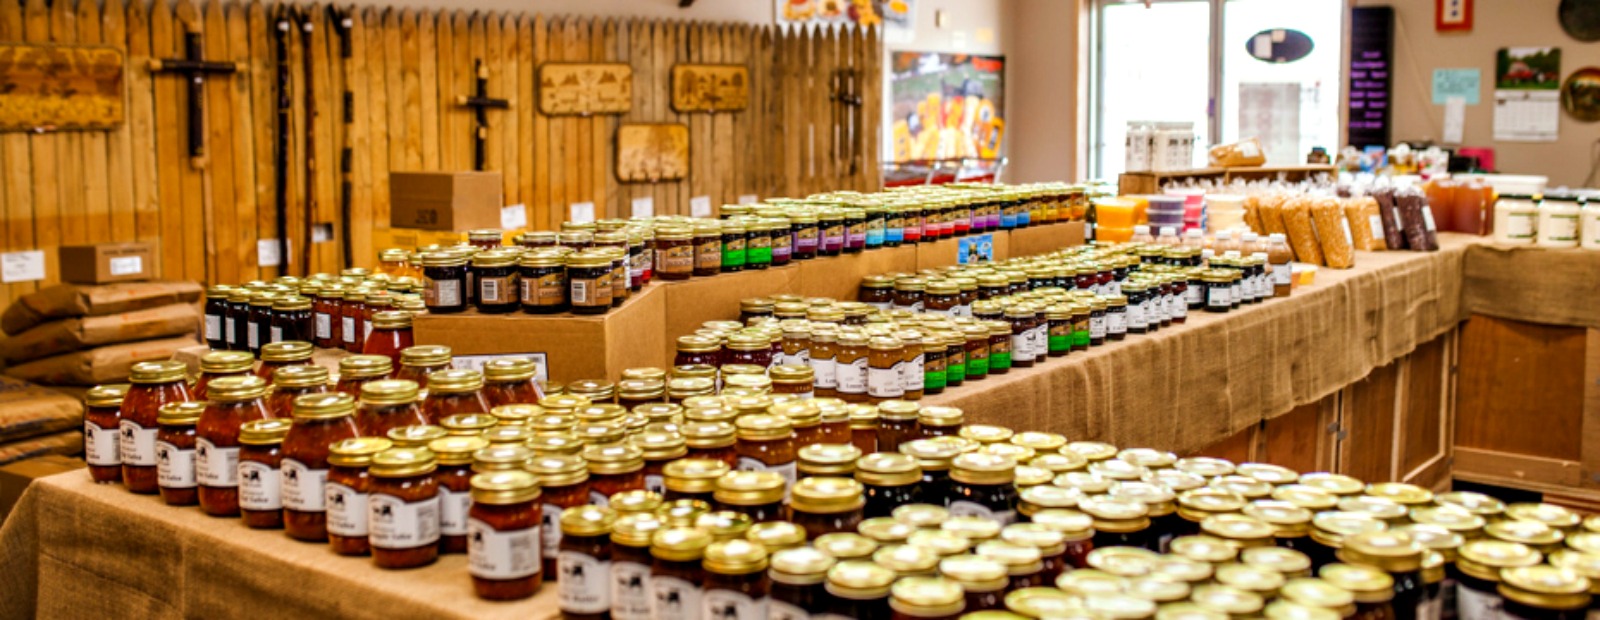 Looking for a new jam? Pick something unique at the Amish Country Market